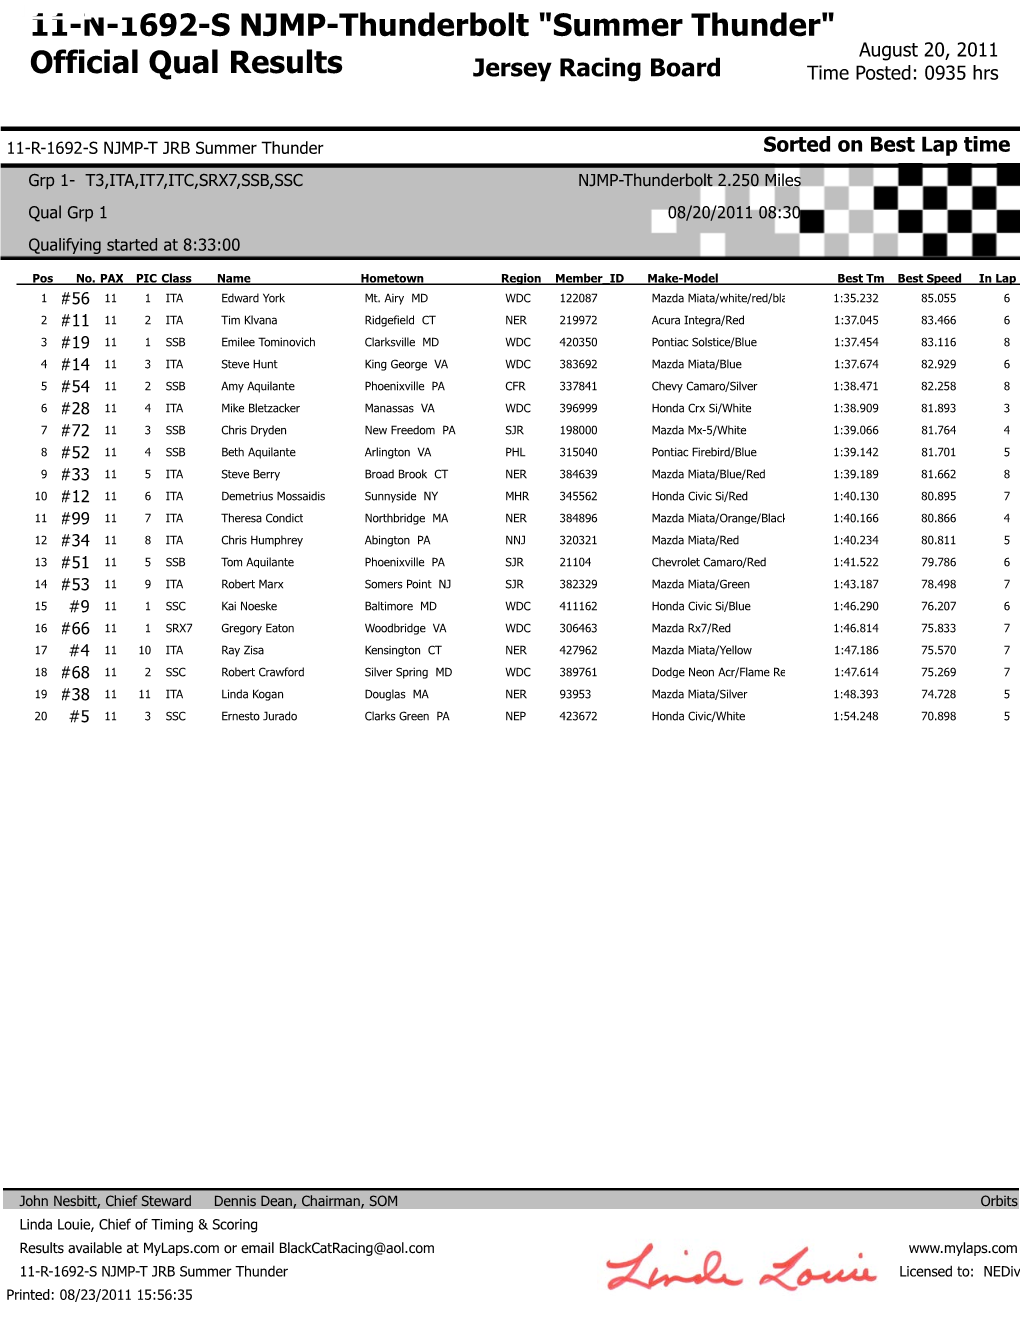 Summer Thunder" August 20, 2011 Official Qual Results Jersey Racing Board Time Posted: 0935 Hrs